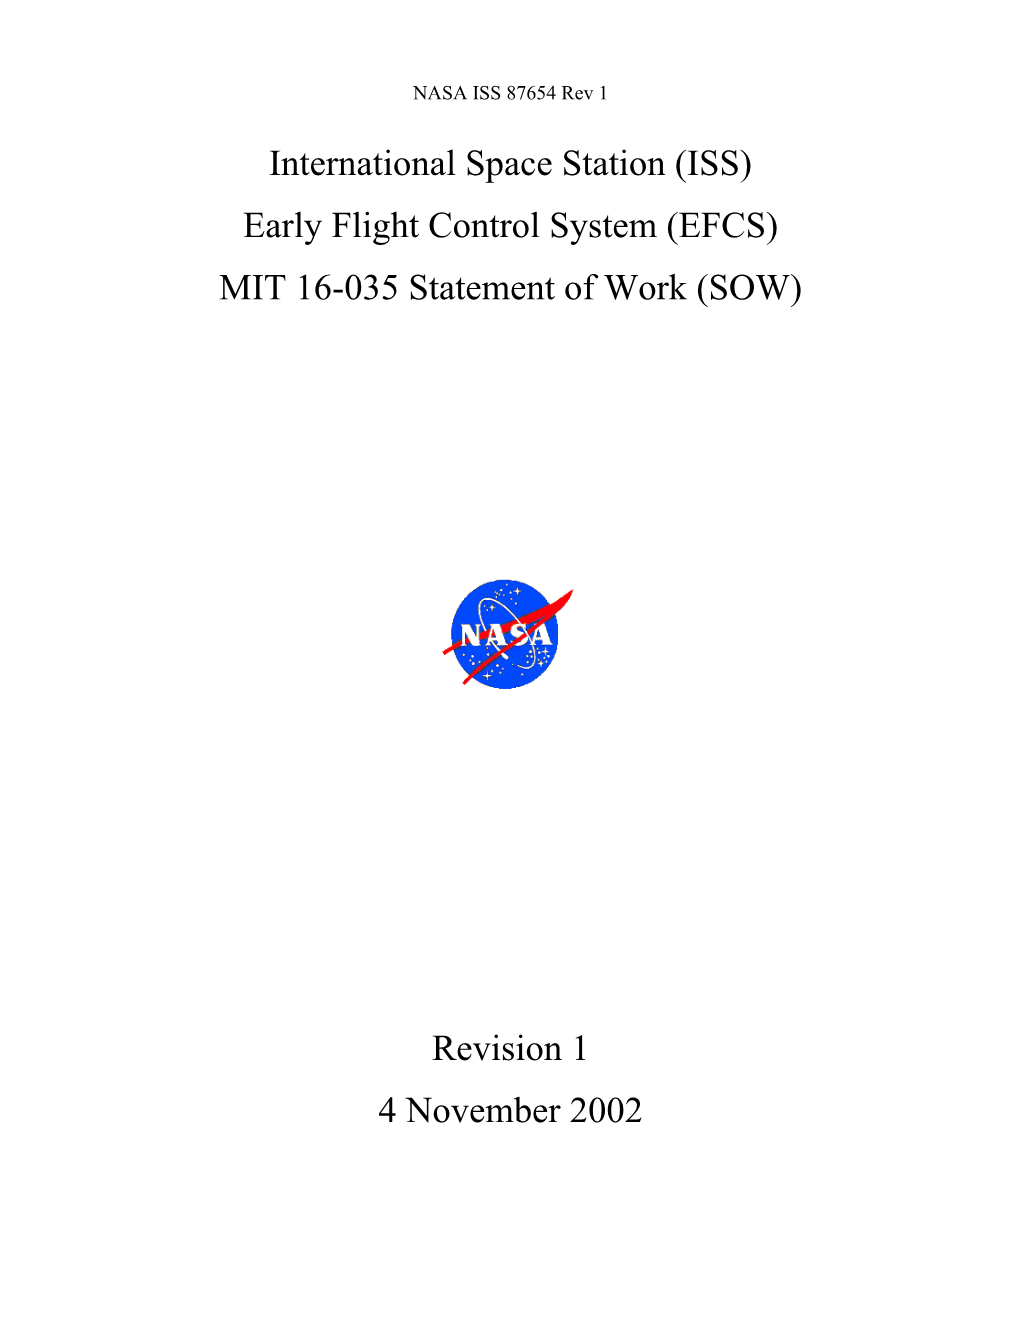 The National Aeronautics and Space Administration (NASA) Provides This Statement of Work